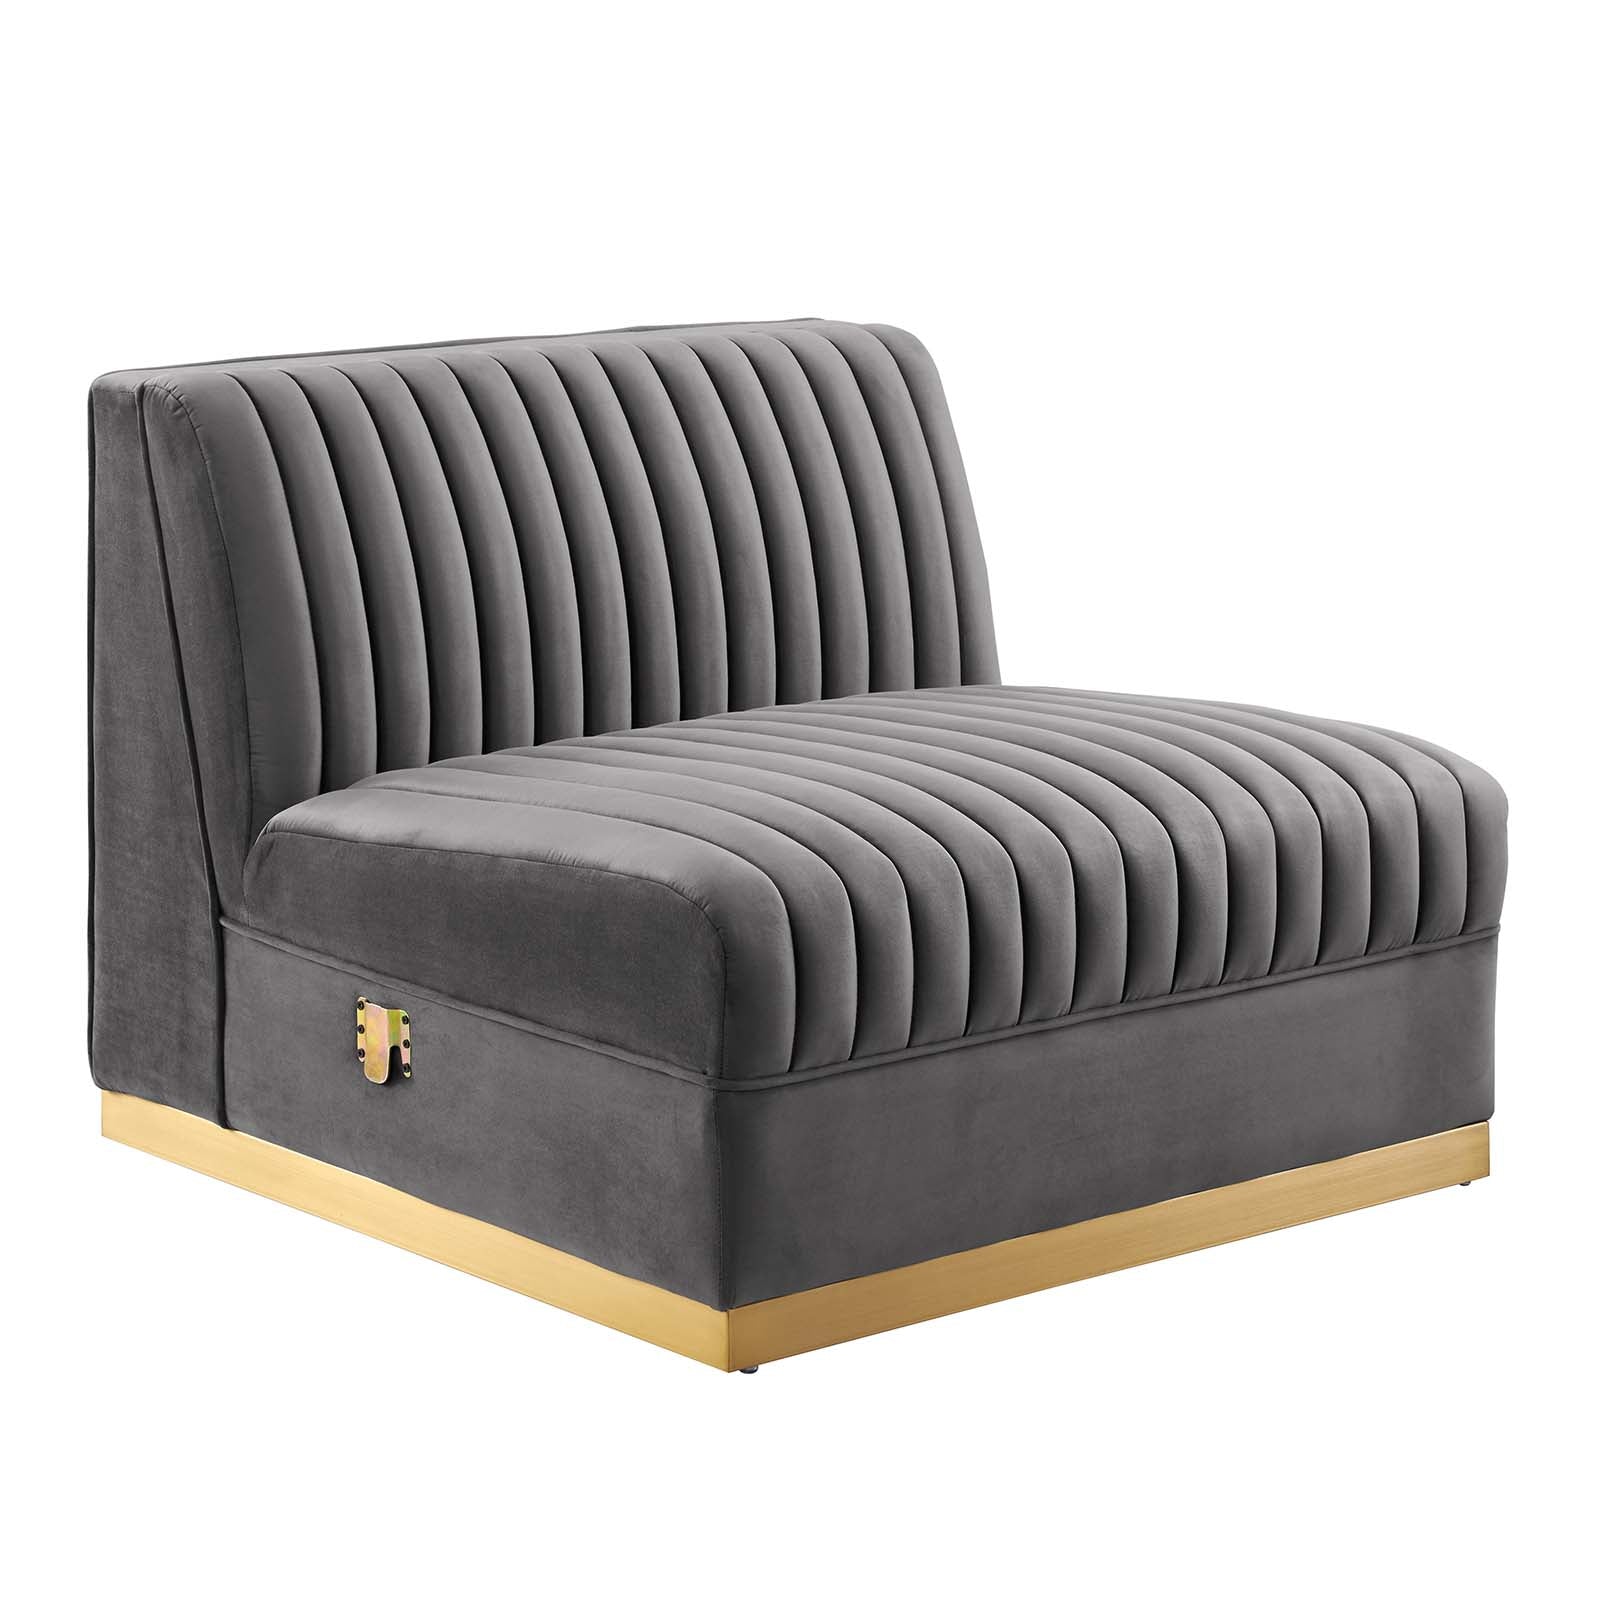 Modway Sectional Sofas - Sanguine Channel Tufted Performance Velvet 3-Seat Modular Sectional Sofa Gray